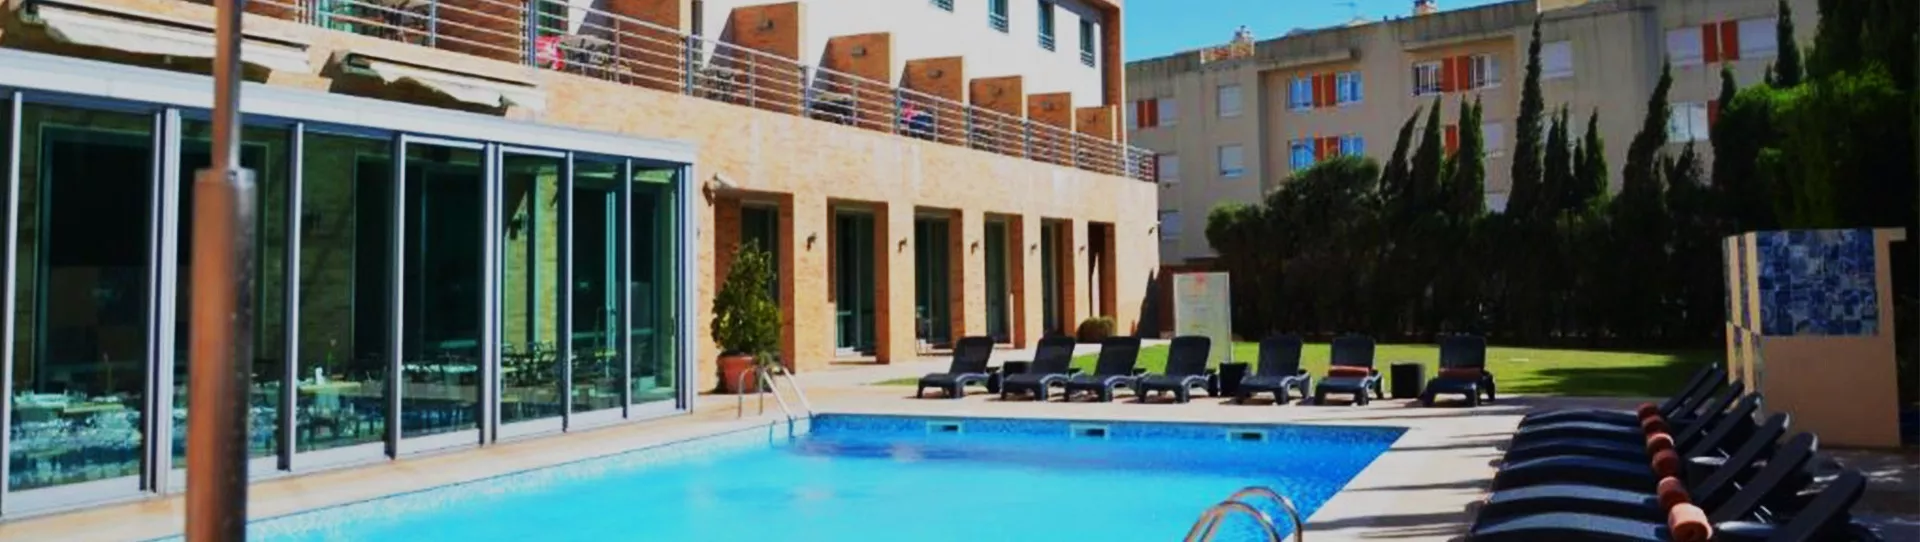 Portugal golf holidays - Hotel Real Oeiras - Photo 1